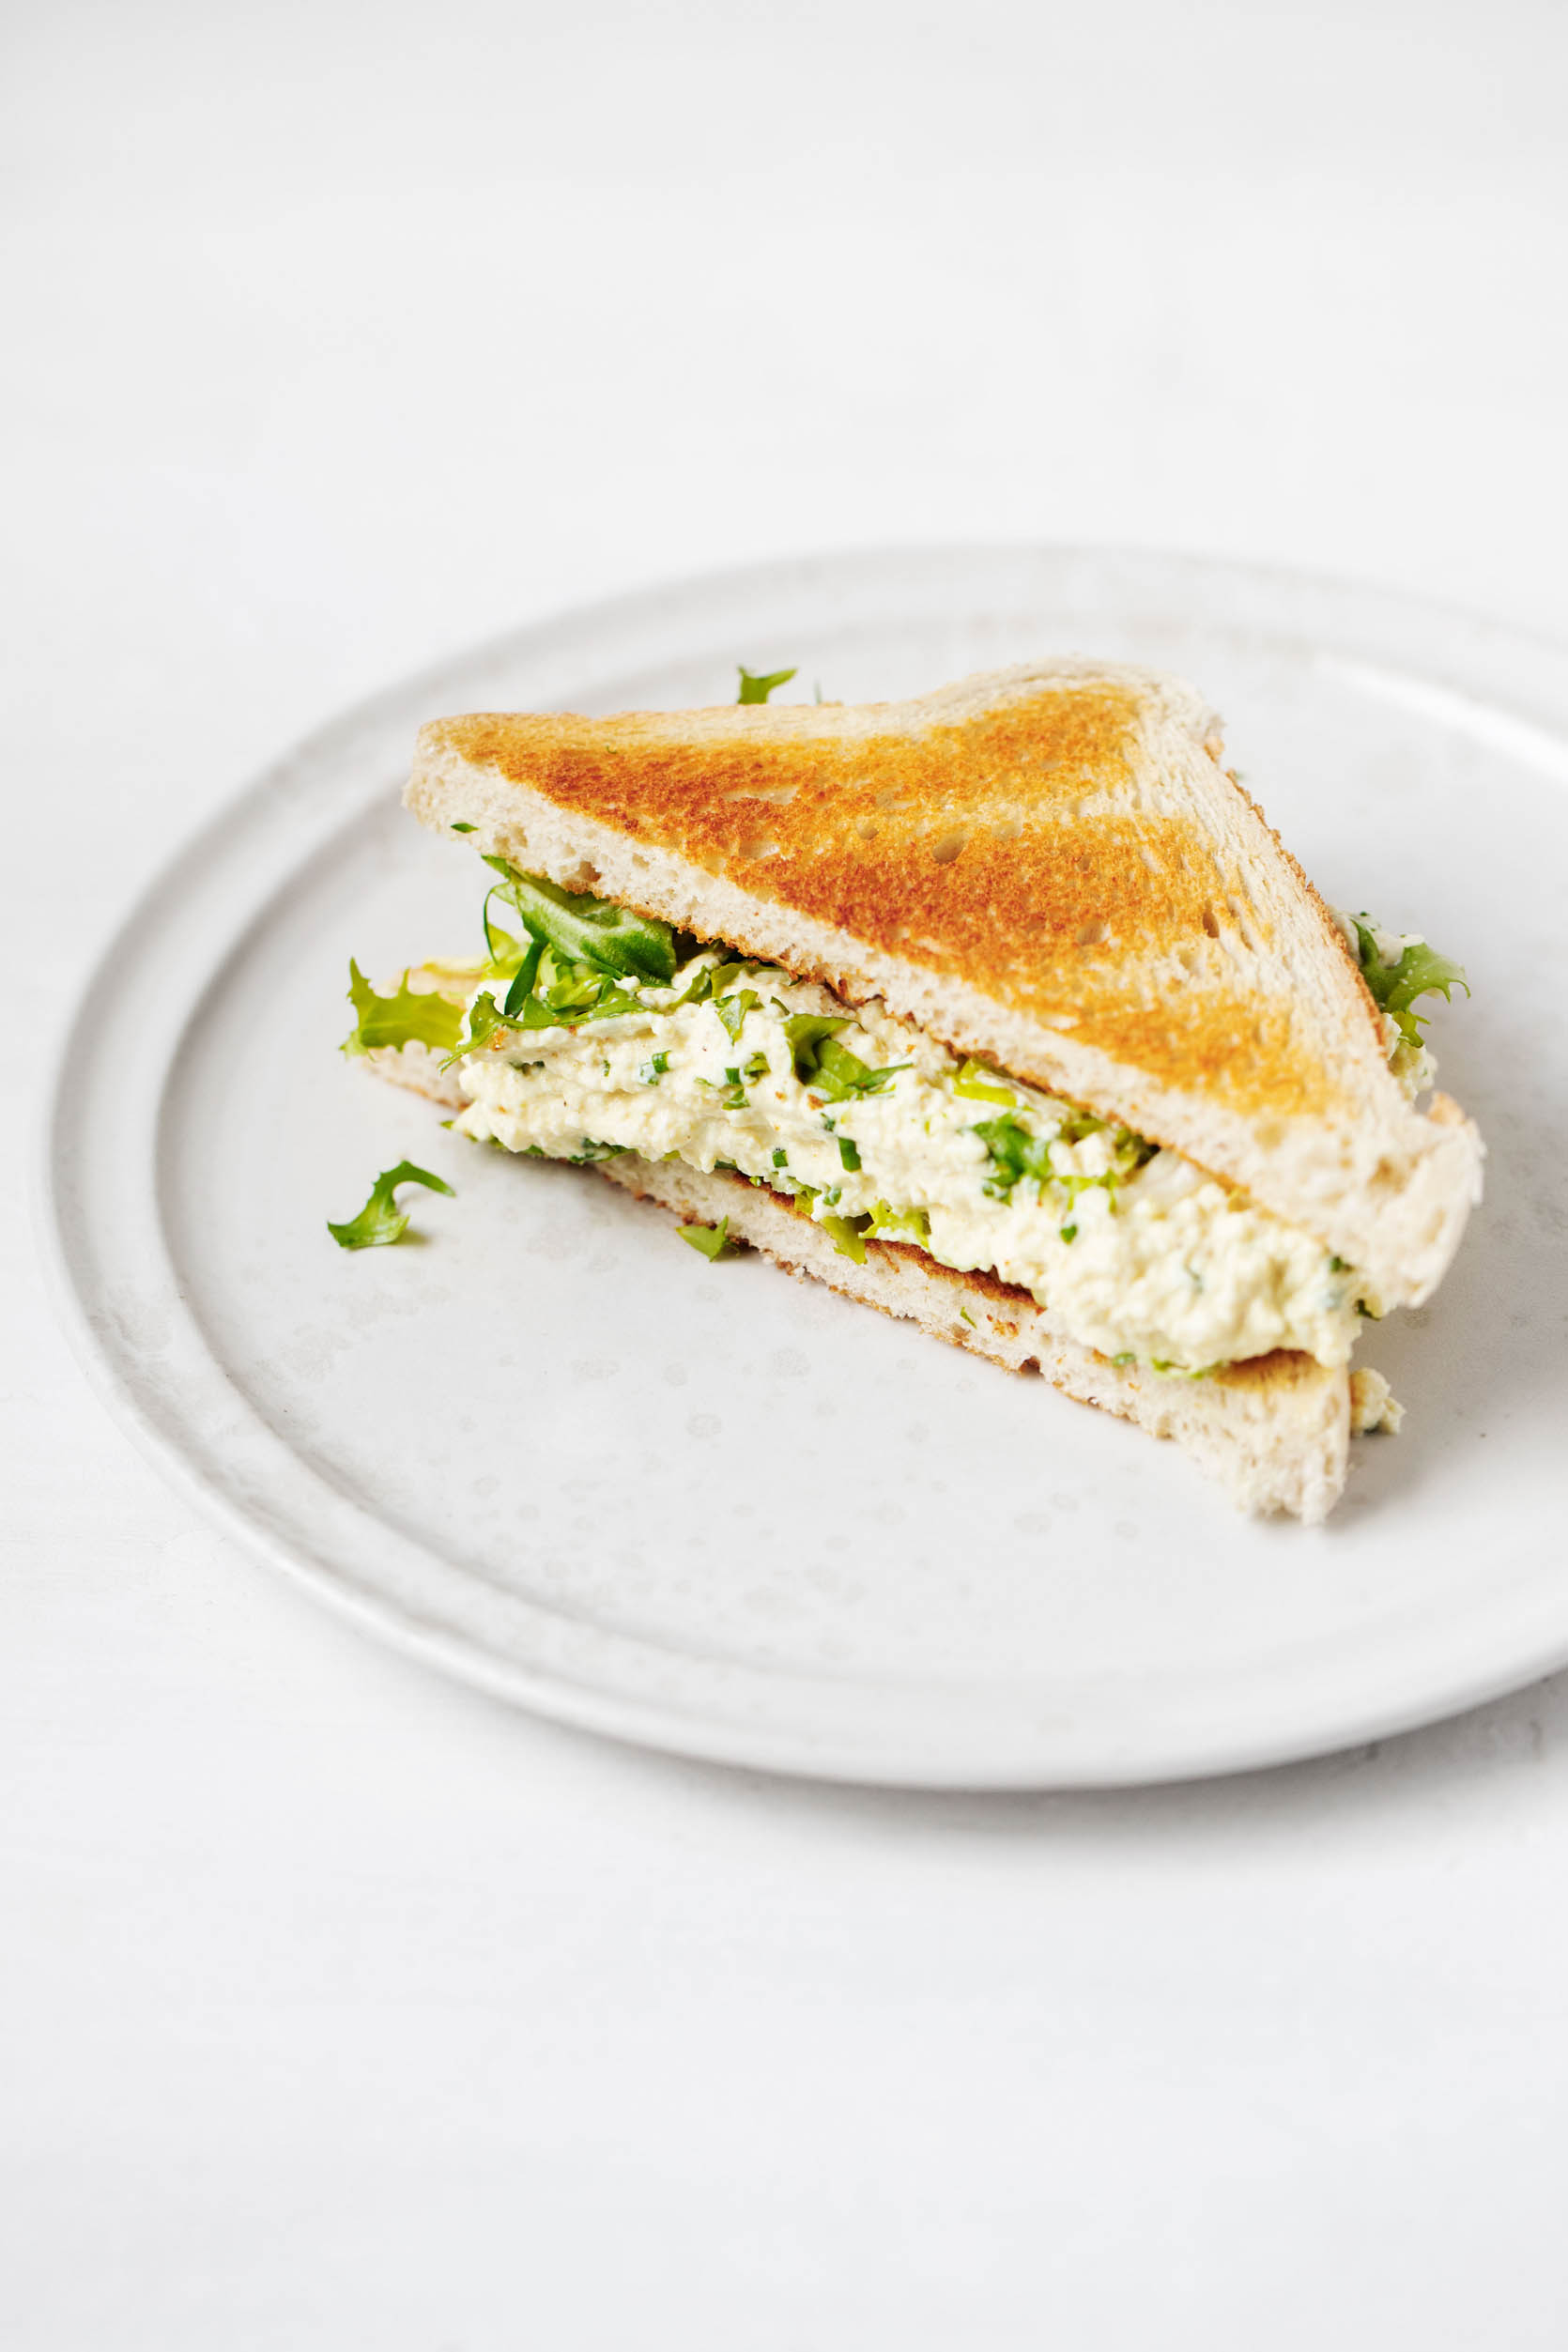 Simple, Flavorful Tofu Egg Salad | The Full Helping